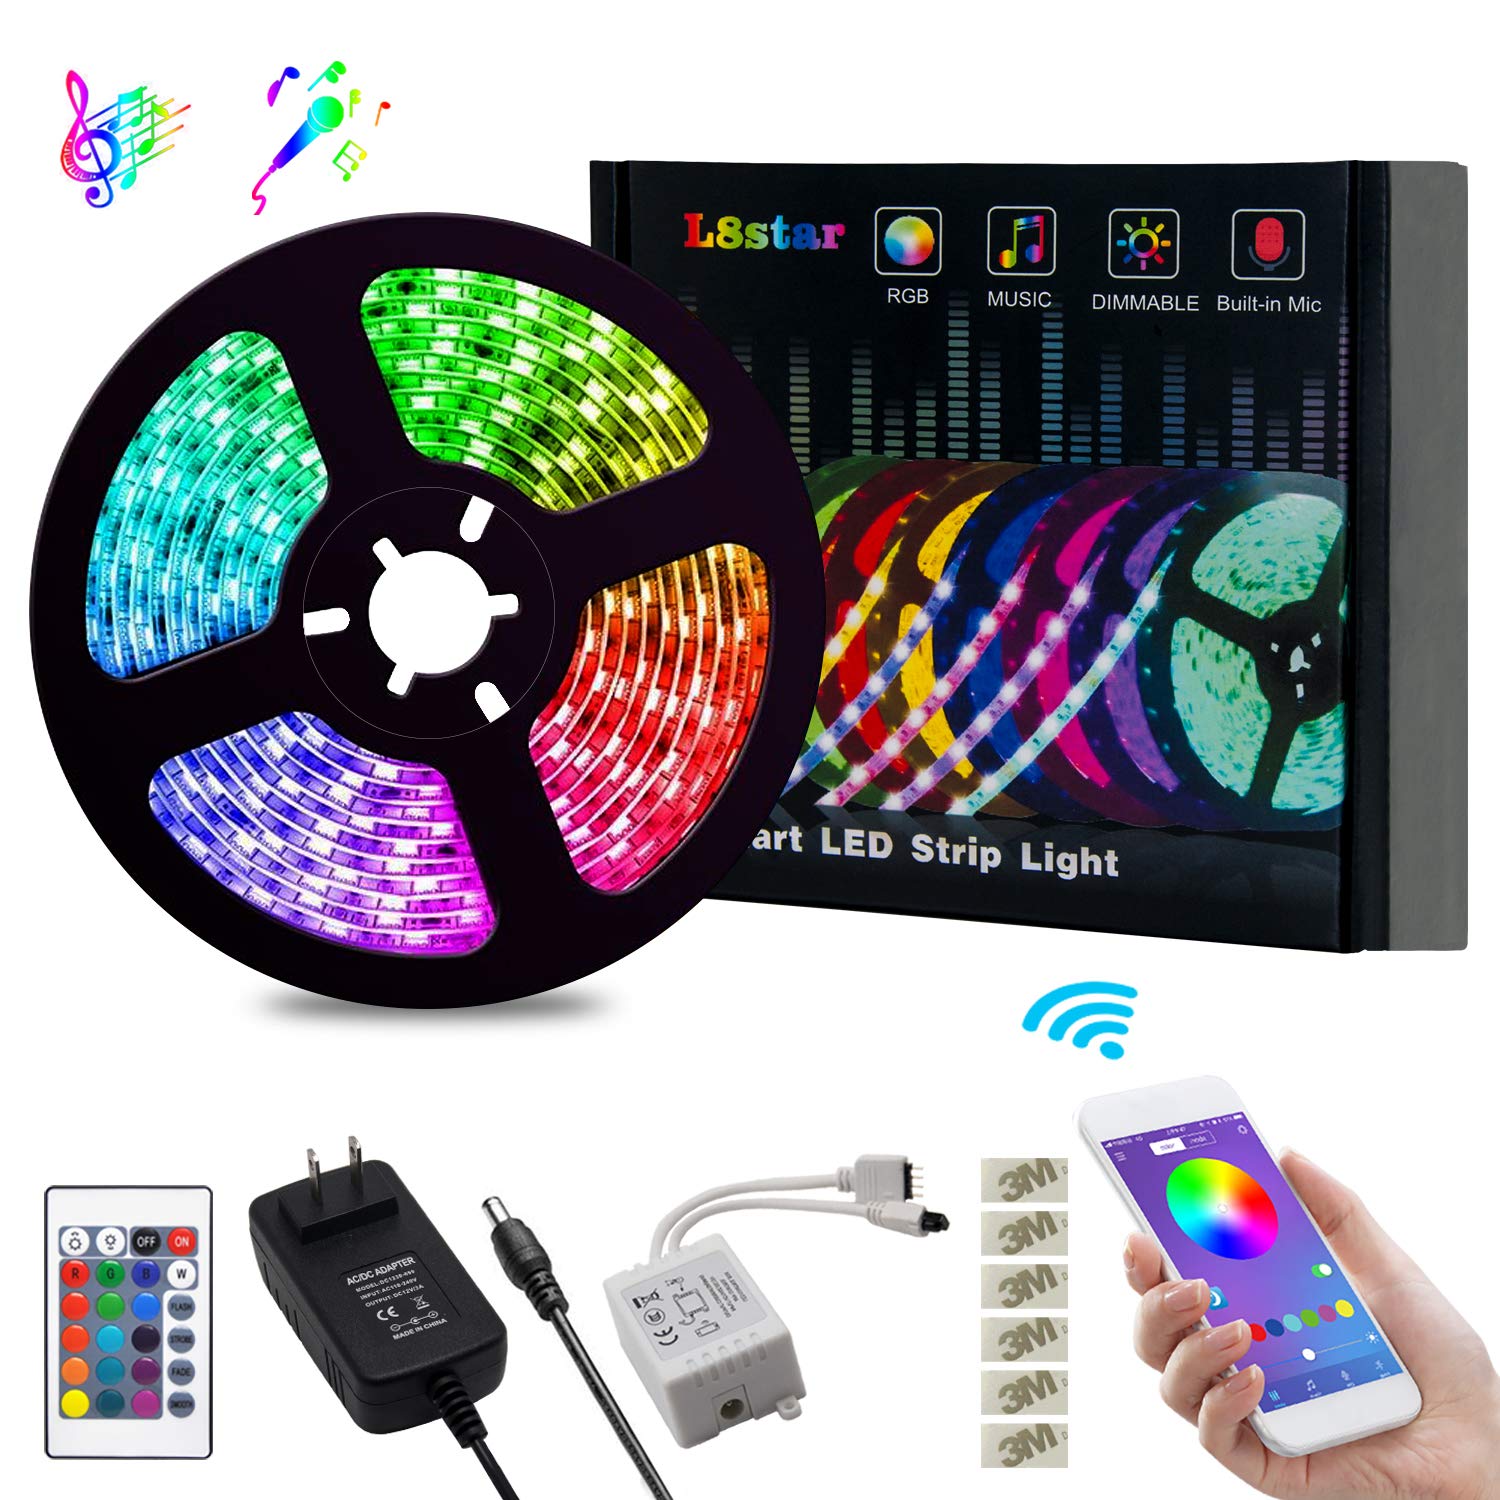 LED Lighting: LED Strip Lights, L8star Color Changing Rope Lights 16.4ft SMD 5050 RGB Light Strips with Bluetooth Controller Sync to Music Apply for TV, Bedroom, Party and Home Decoration (16.4ft)